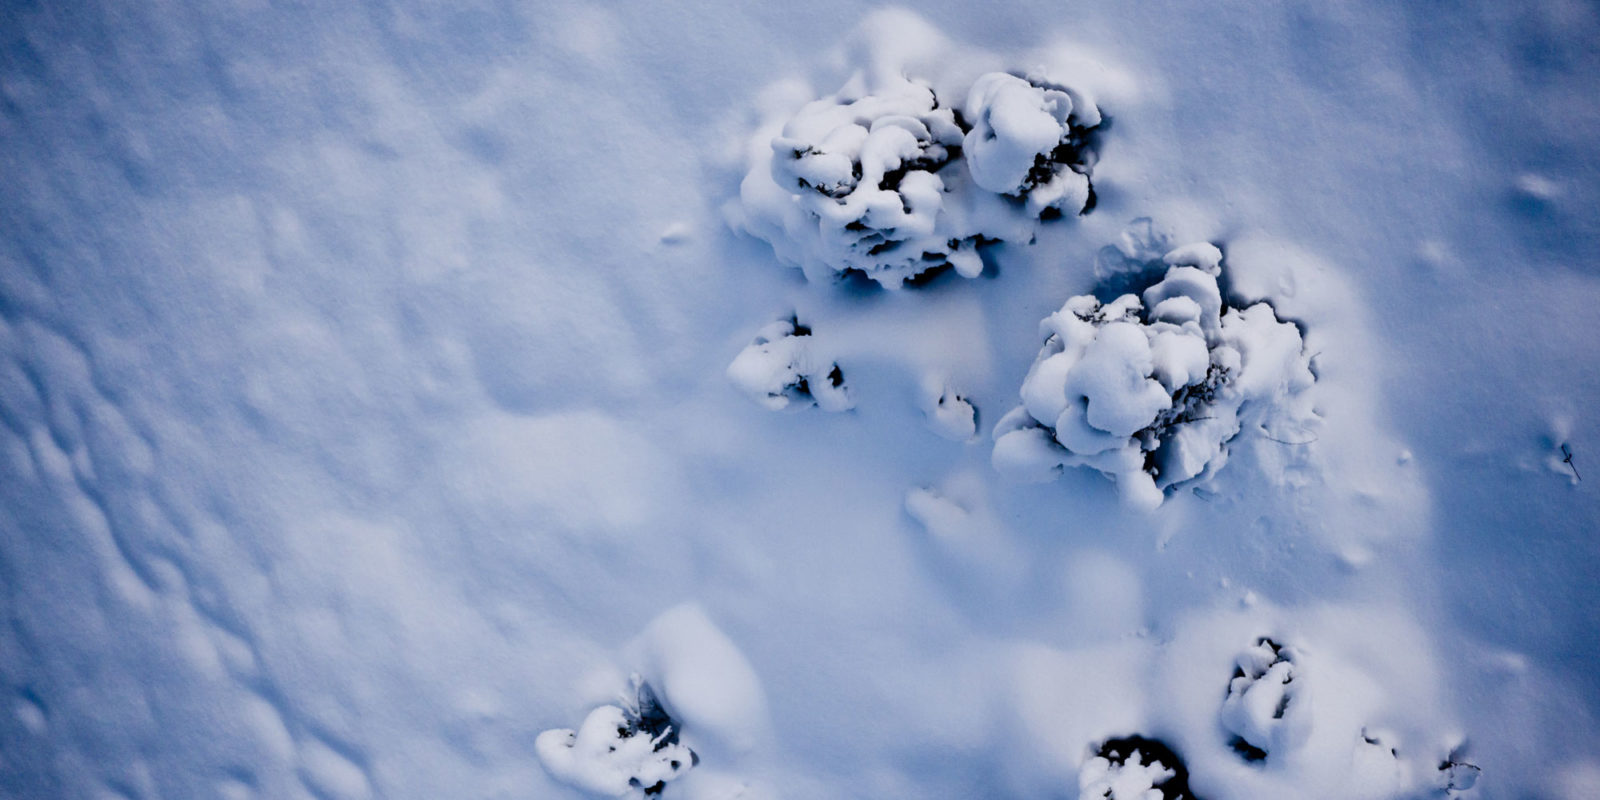 Snow from above